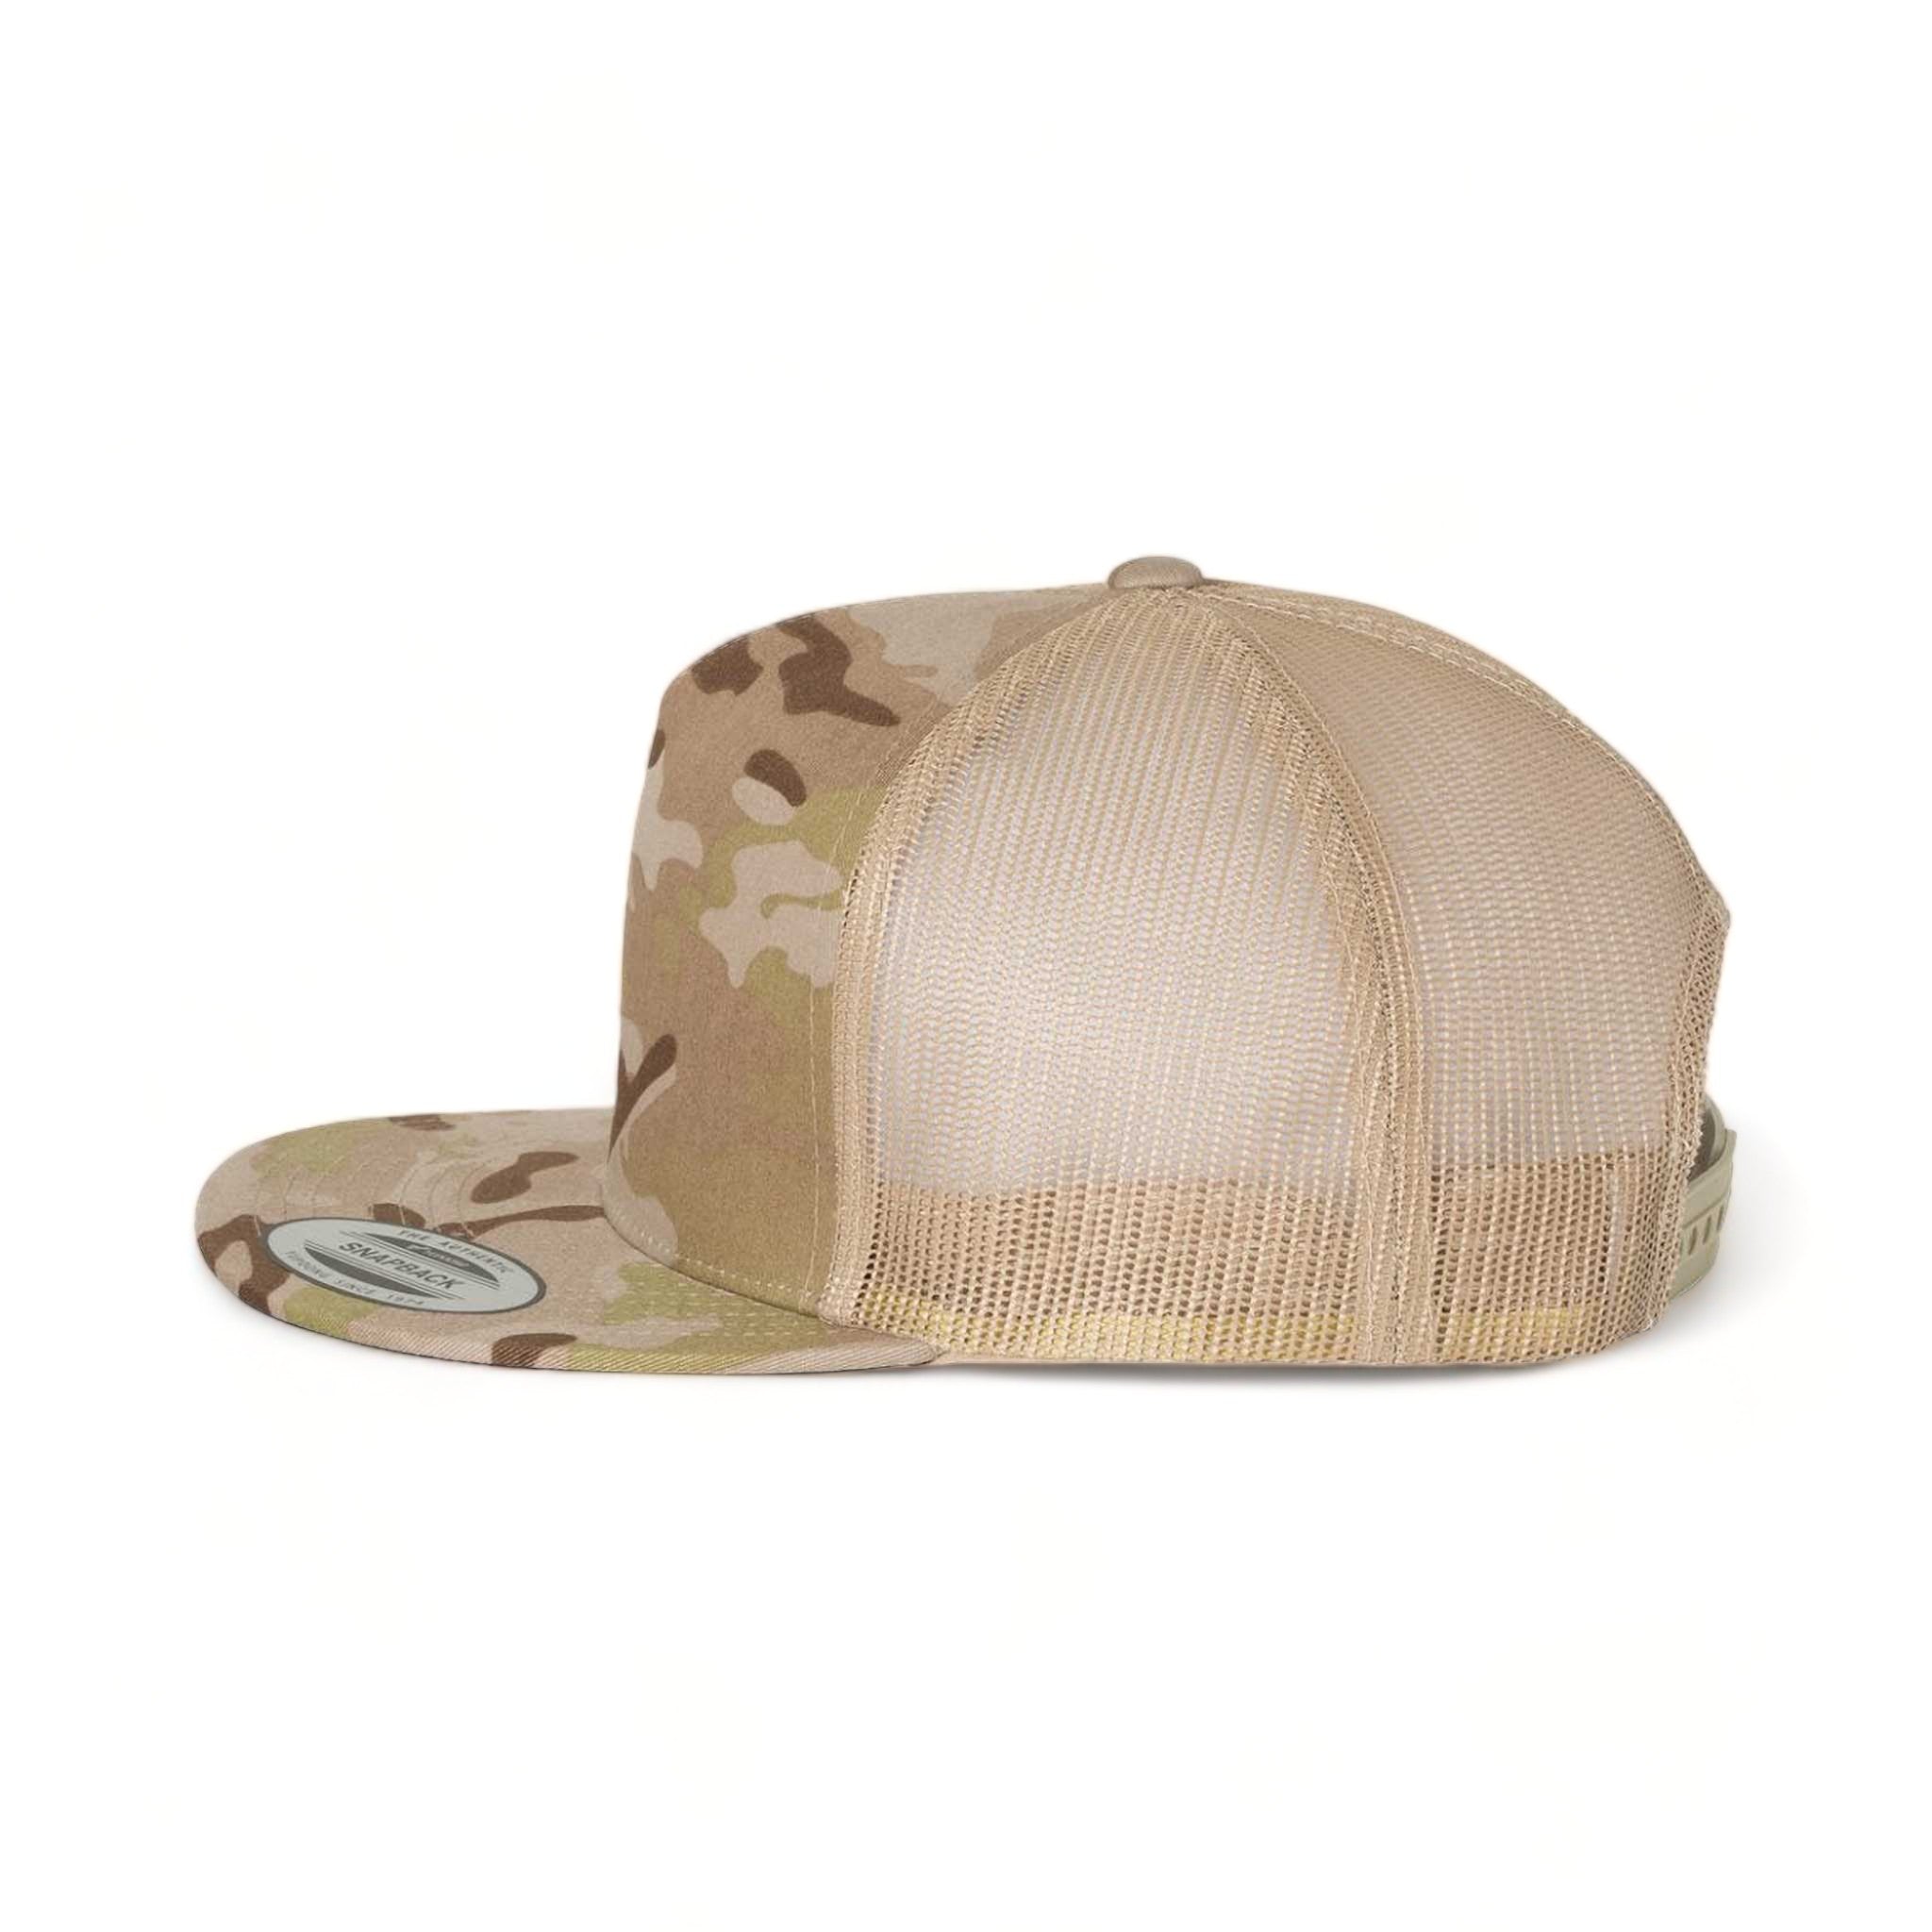 Side view of YP Classics 6006 custom hat in multicam arid and tan